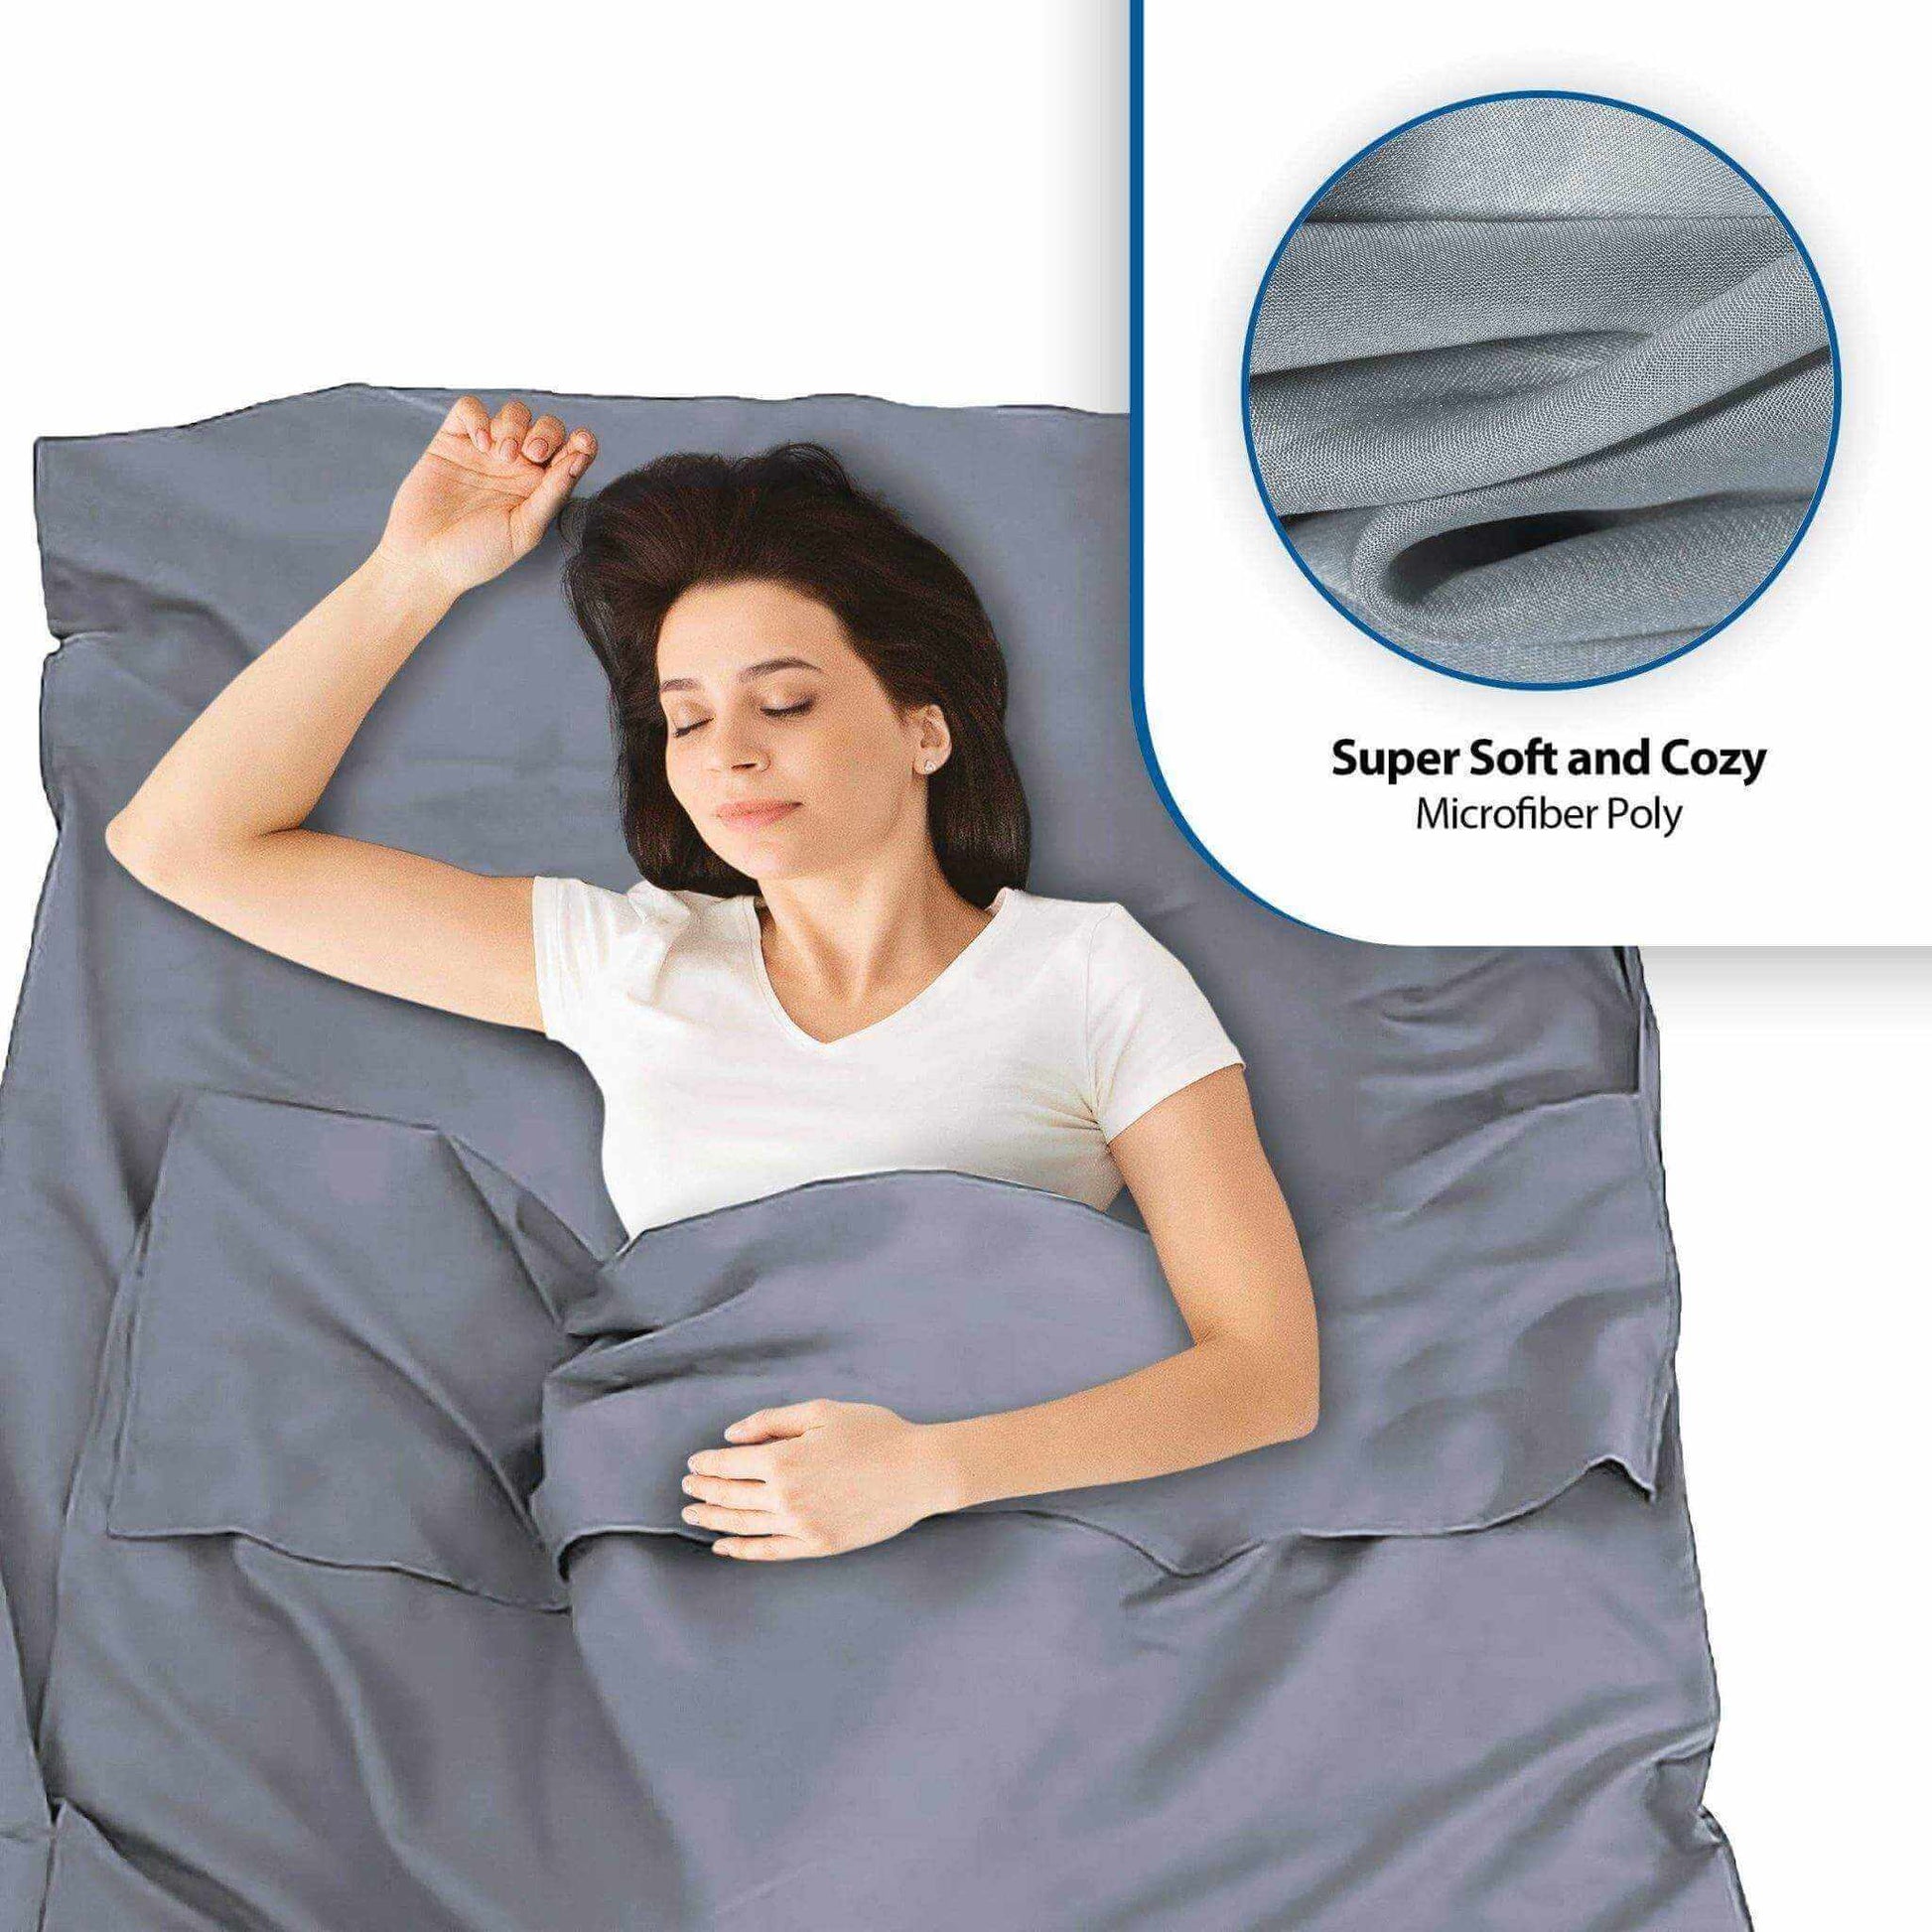 Compact travel sleep sack in soft, cozy microfiber poly for restful slumber on the go.